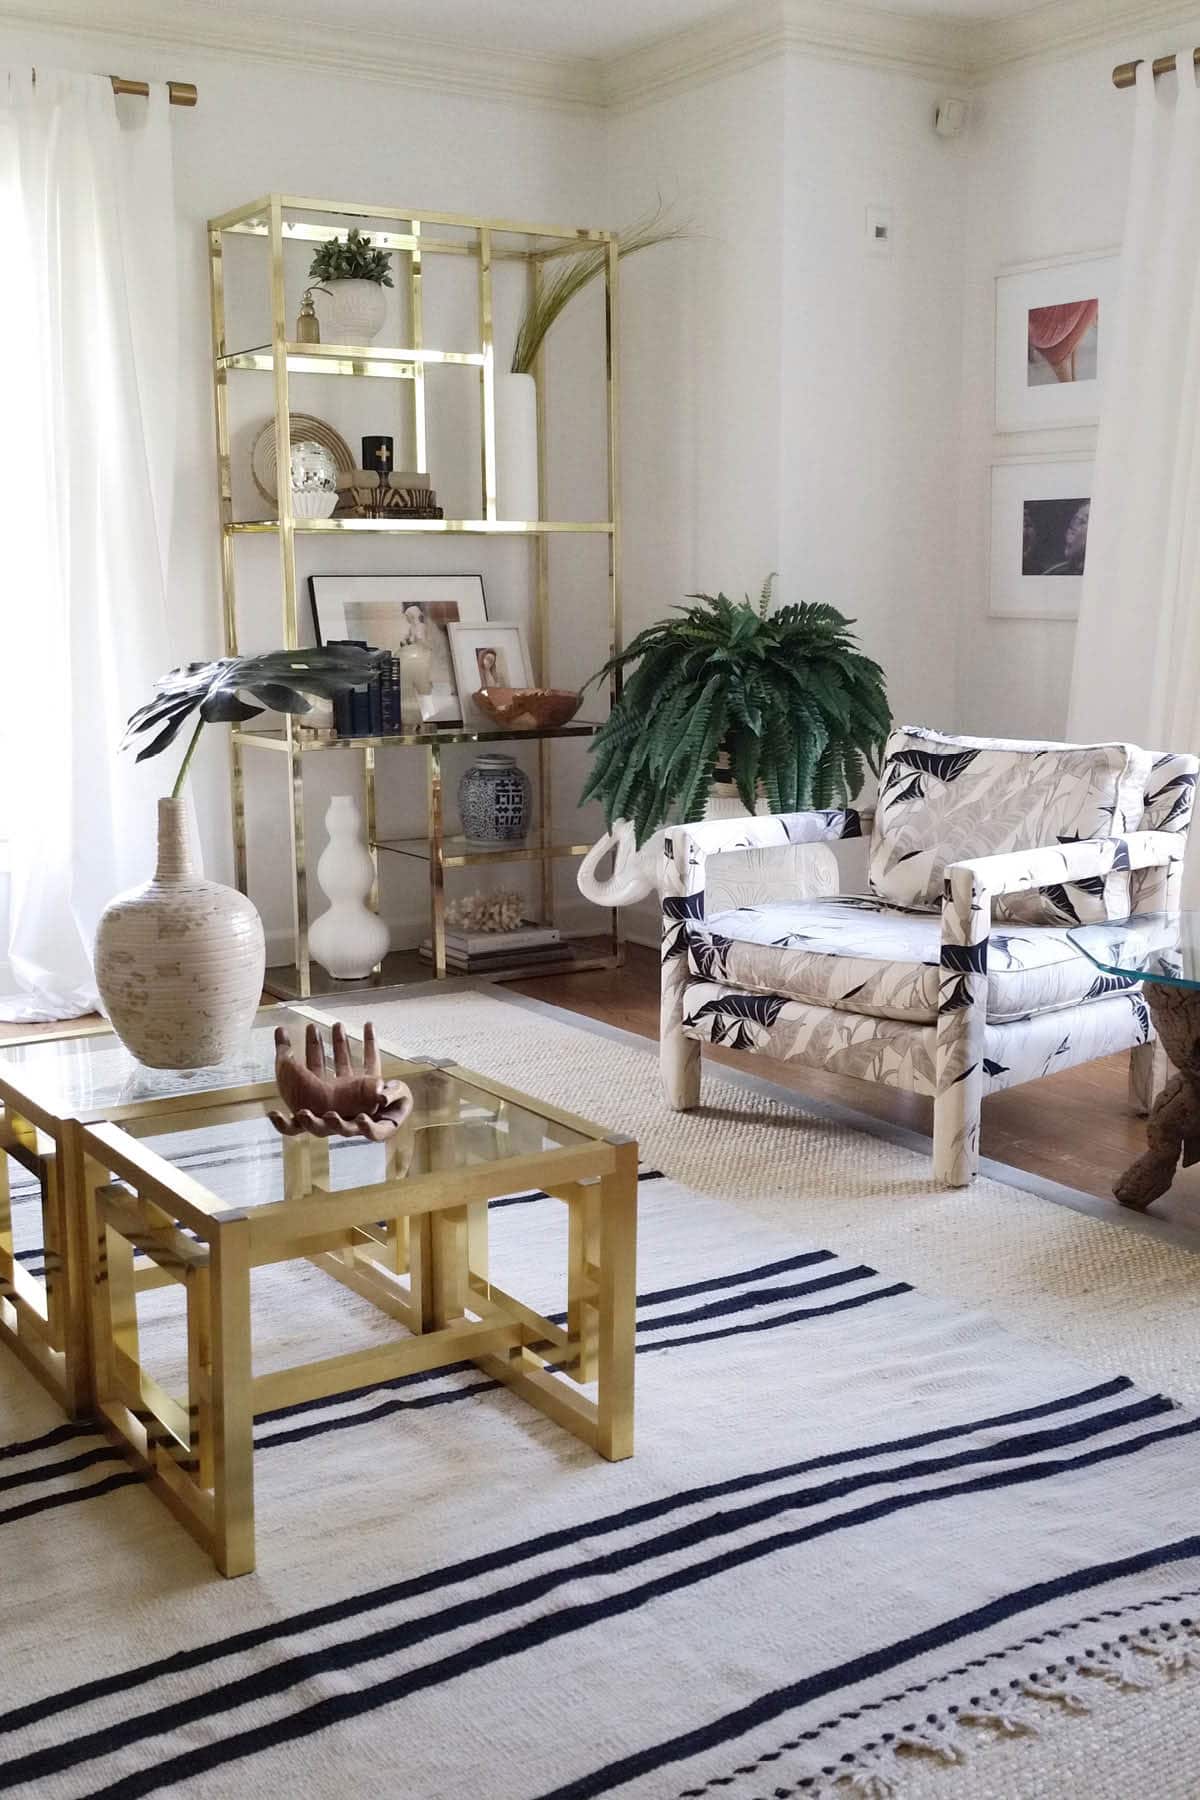 Top 3 Standard Living Room Rug Sizes, plus How to Choose